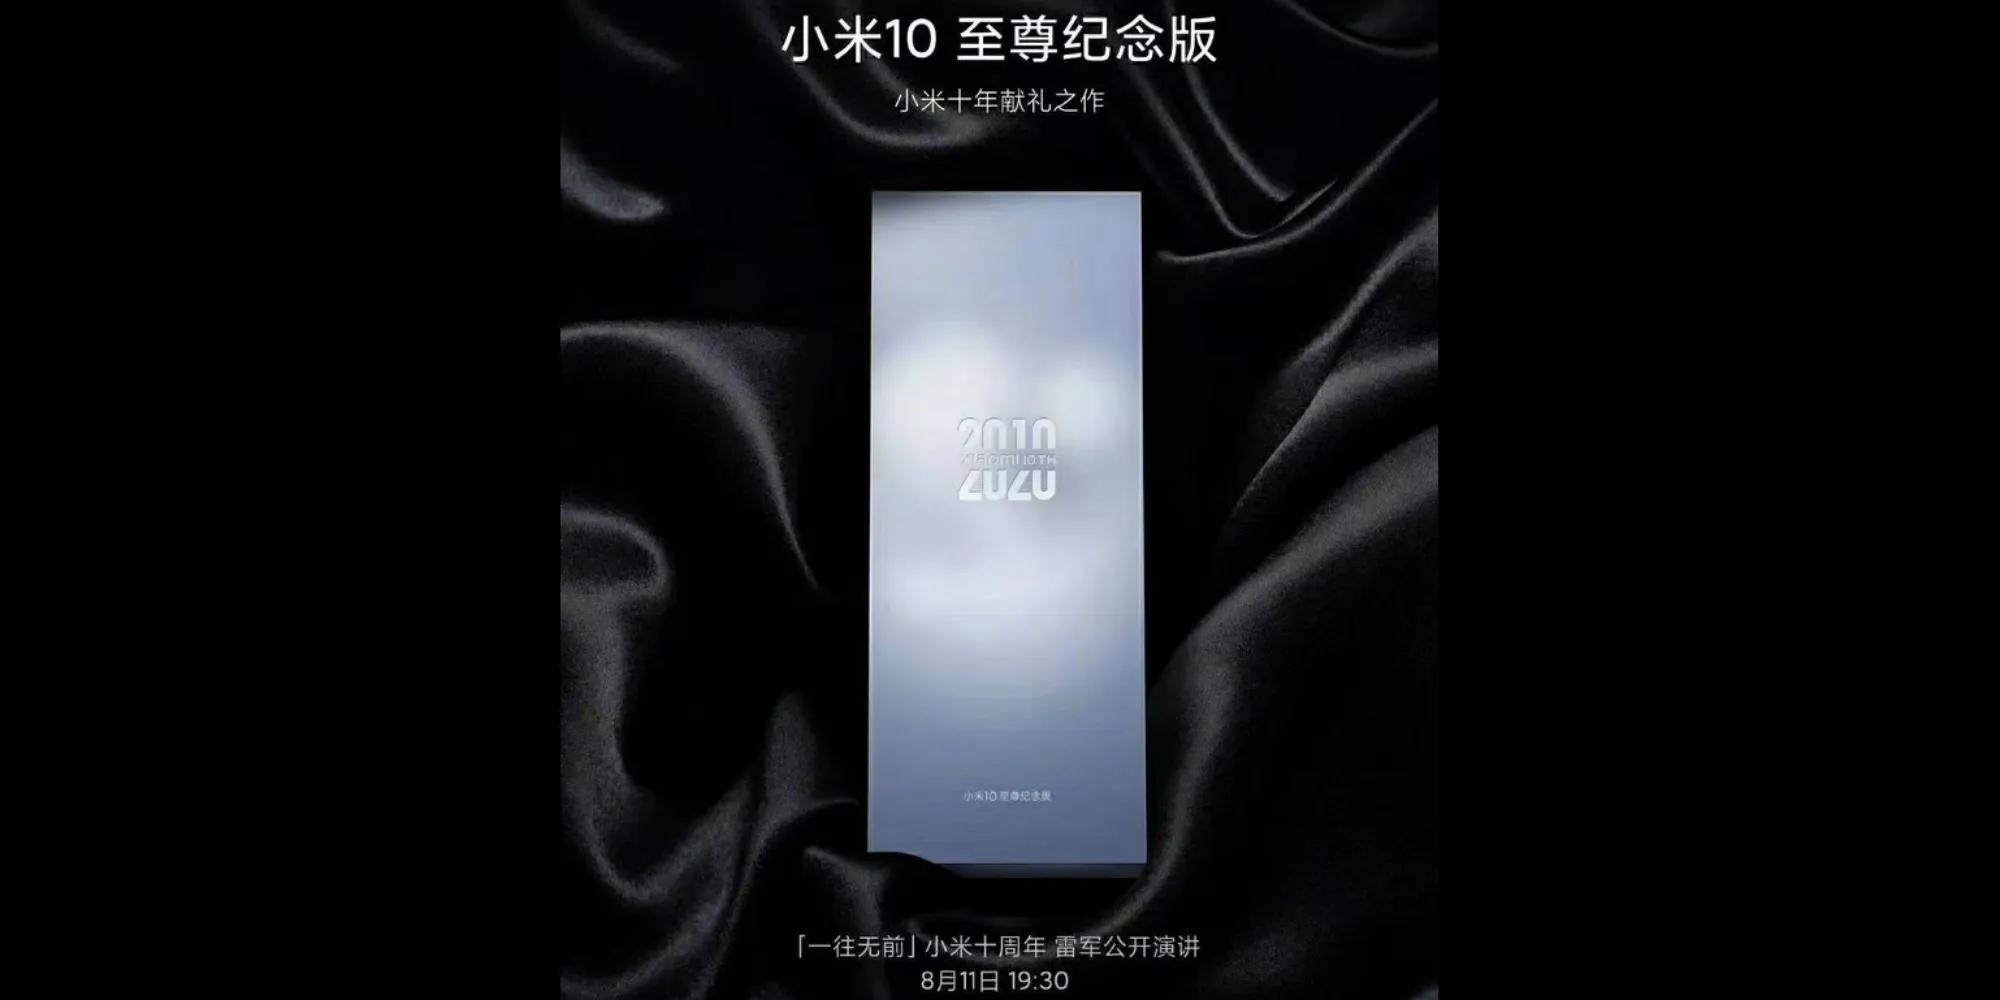 Xiaomi Mi 10 Ulta (Redmi K30 Ultra) anniversary edition surfaced online with Color option and Key Specfication